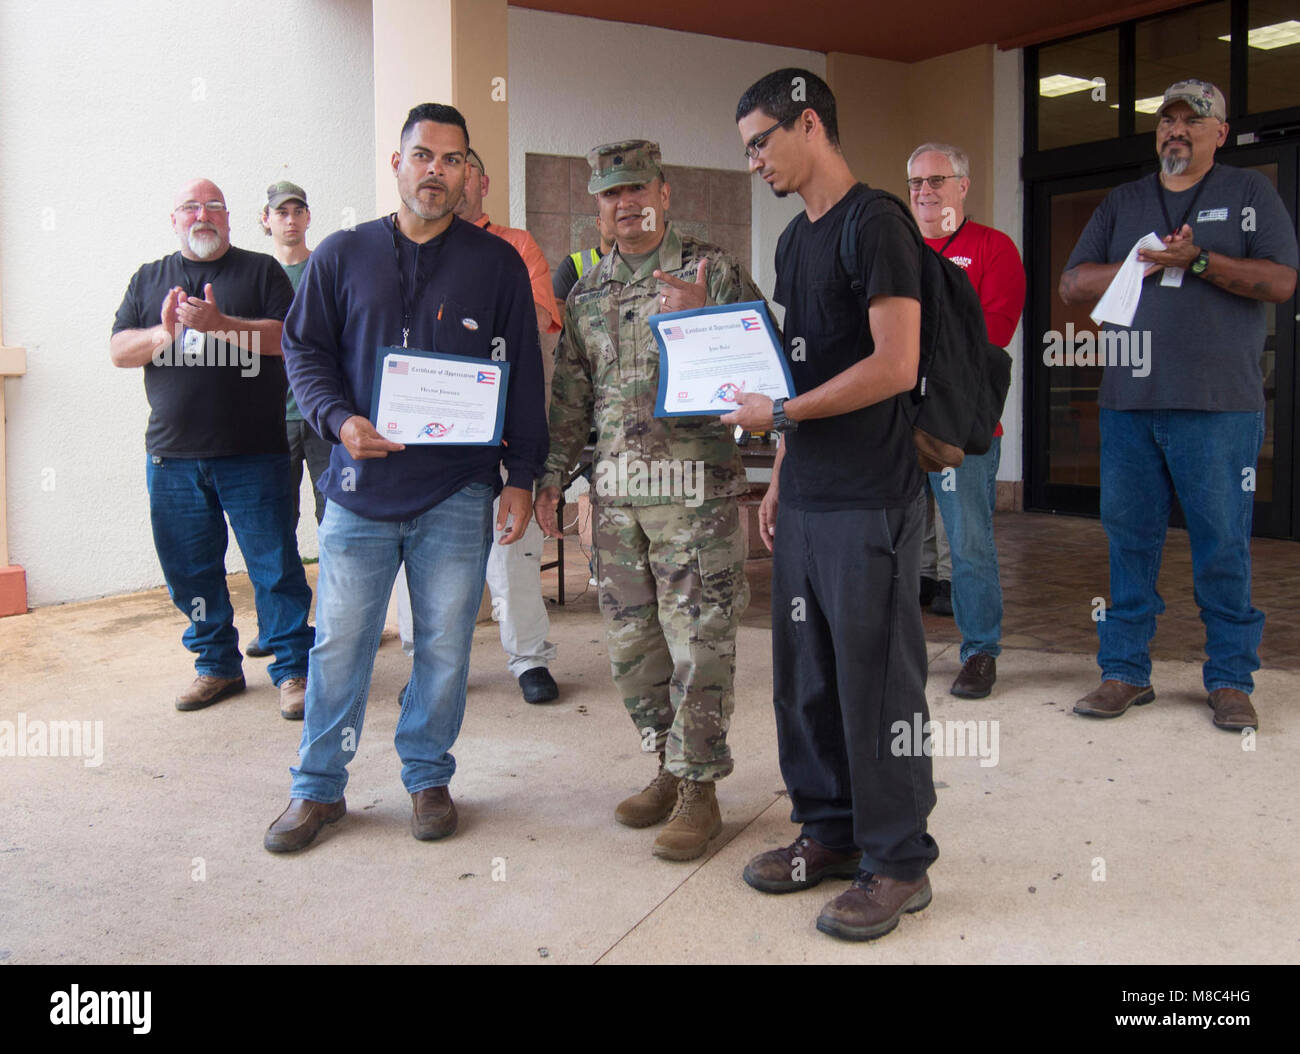 SAN JUAN, PUERTO RICO— Lt. Col. Roberto Solorzano, the commander of the U.S. Army Corps of Engineers Recovery Field Office in Puerto Rico, presented certificates of appreciation to Hector Jimenez and Jose Ruiz for their support in bringing electrical power to the people of Puerto Rico. Part of the temporary power mission, quality assurance teams inspect more than 500 installed generators daily to ensure functionality and to identify maintenance needs. Stock Photo